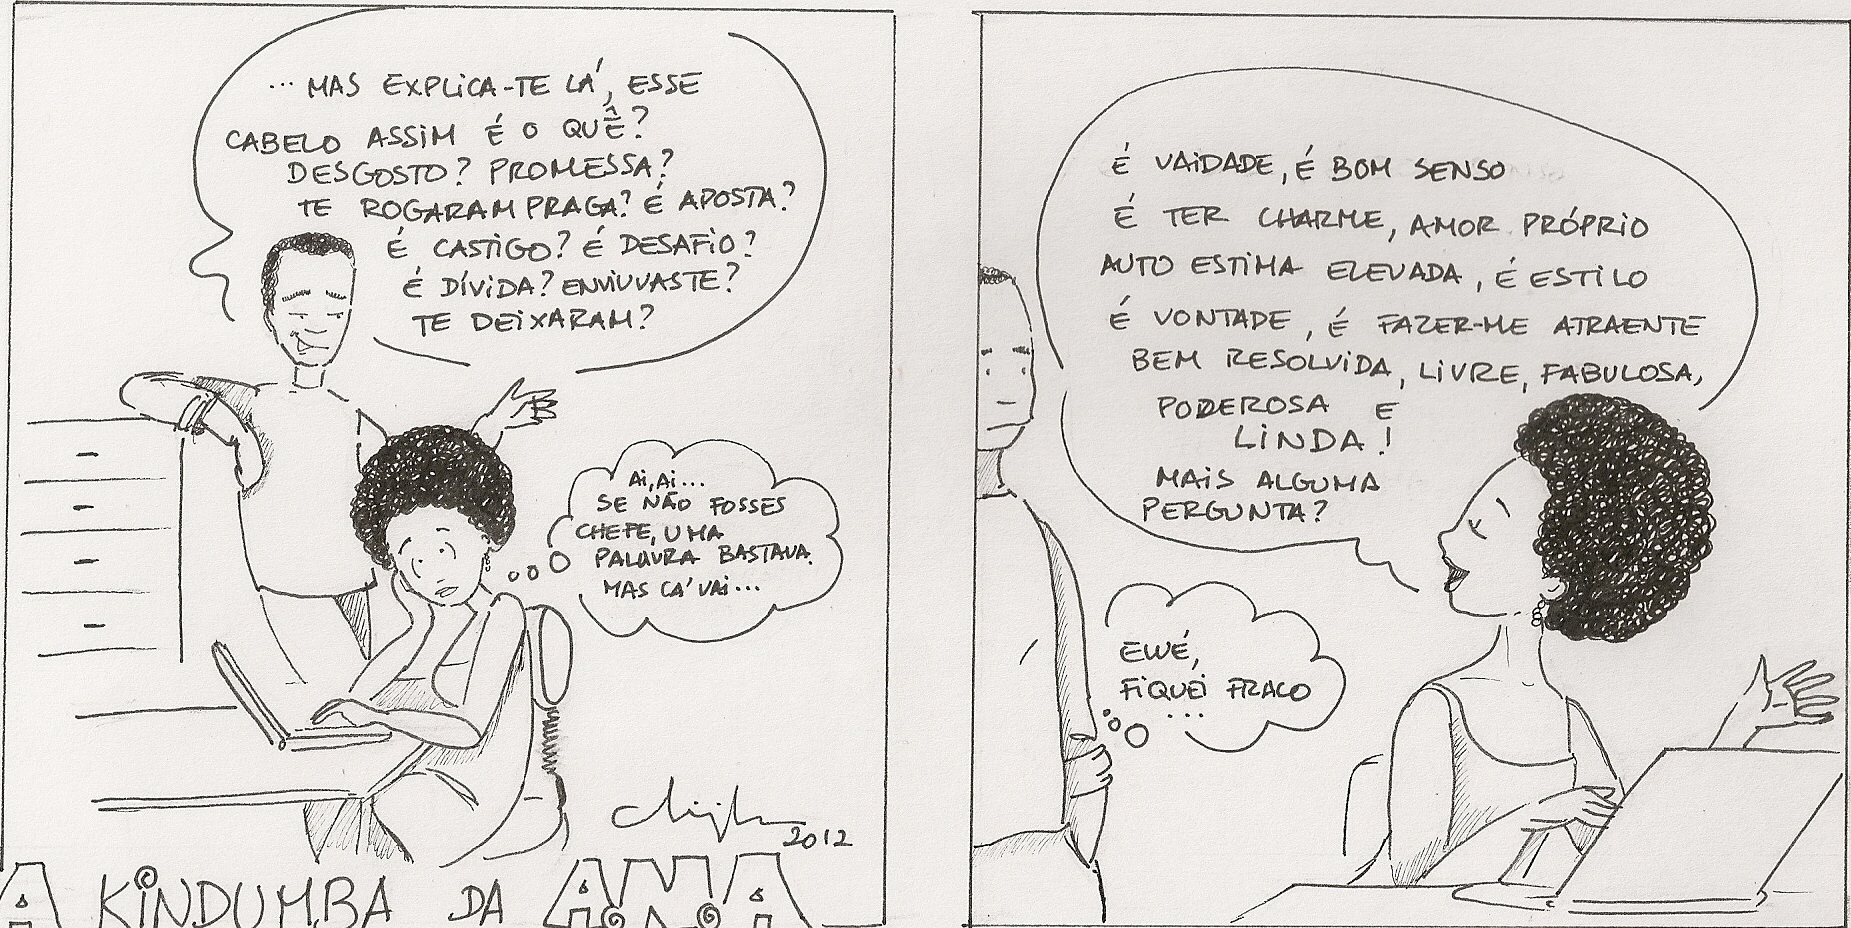  In this strip, Ana suffers from the harassment of her boss with respect to her hair. (1) The boss says: Explain to me, your hair like that, what is it? Some problem? A pledge? Somebody put a curse on you? Is it a bet? Is it punishment? A challenge? A debt? Were you widowed? Did someone leave you? (2) Ana thinks: Ai ai... If you weren't the boss, one word would do it, but that's how it is... (3) Ana responds: it's pride, it's good sense, it's having charm, self-love, higher self-esteem, it's stylish, it's a choice, it's making myself attractive, well-resolved, free, fabulous, powerful and beautiful! Any more questions? (4) The boss thinks: Uh-oh, now I look weak...